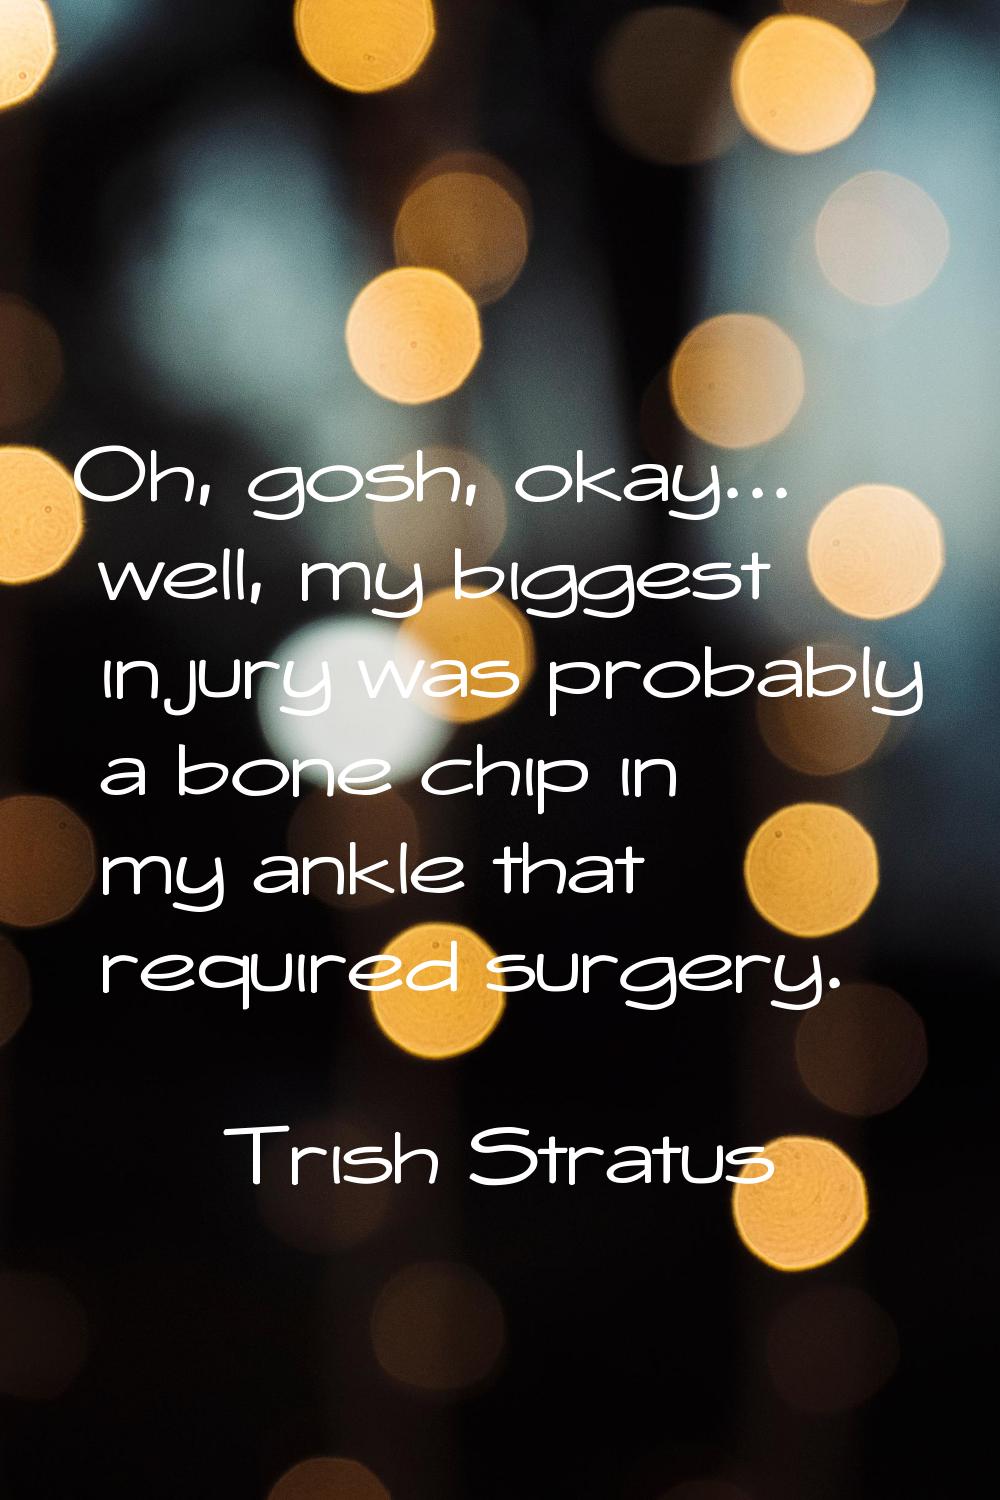 Oh, gosh, okay... well, my biggest injury was probably a bone chip in my ankle that required surger